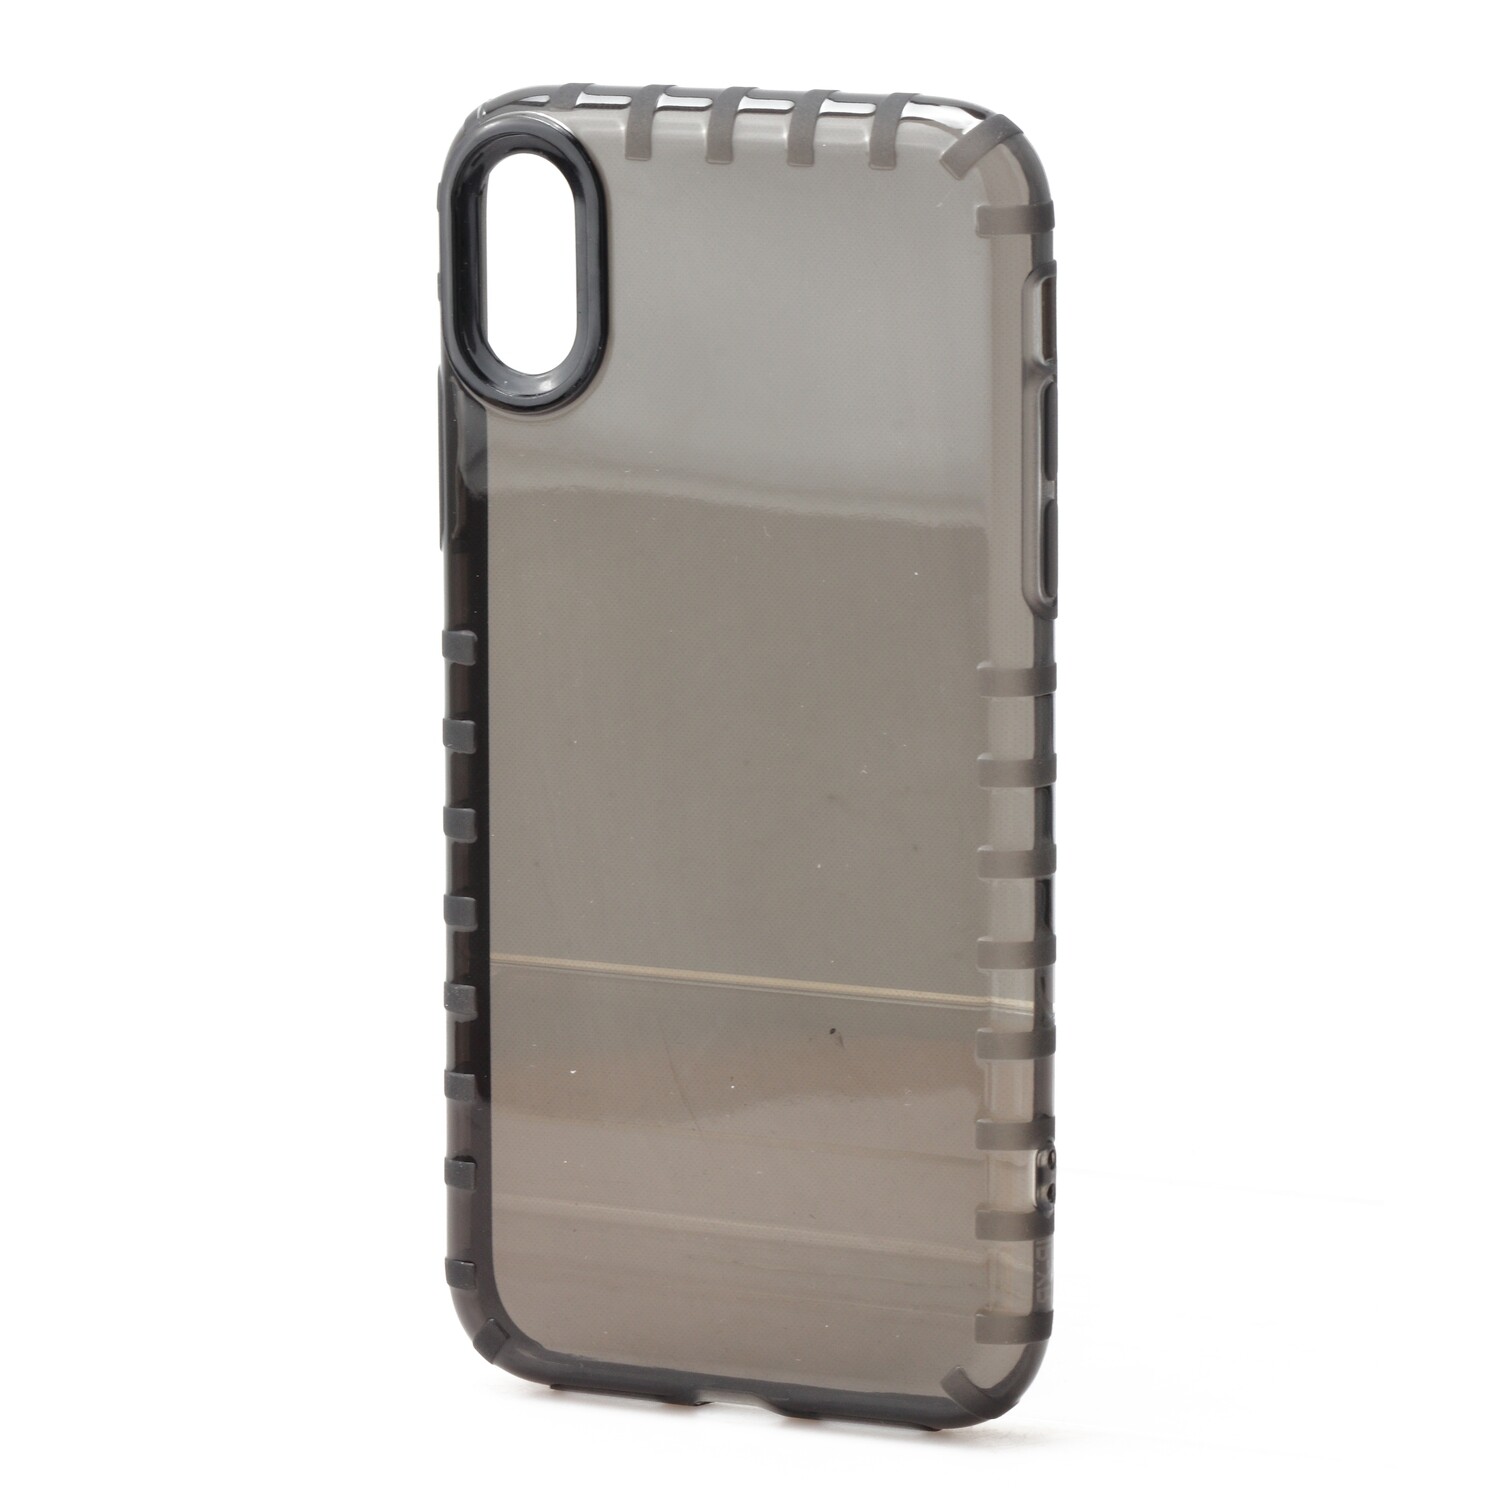 iPhone XR 6.1 Clear Slip Proof Jelly Case